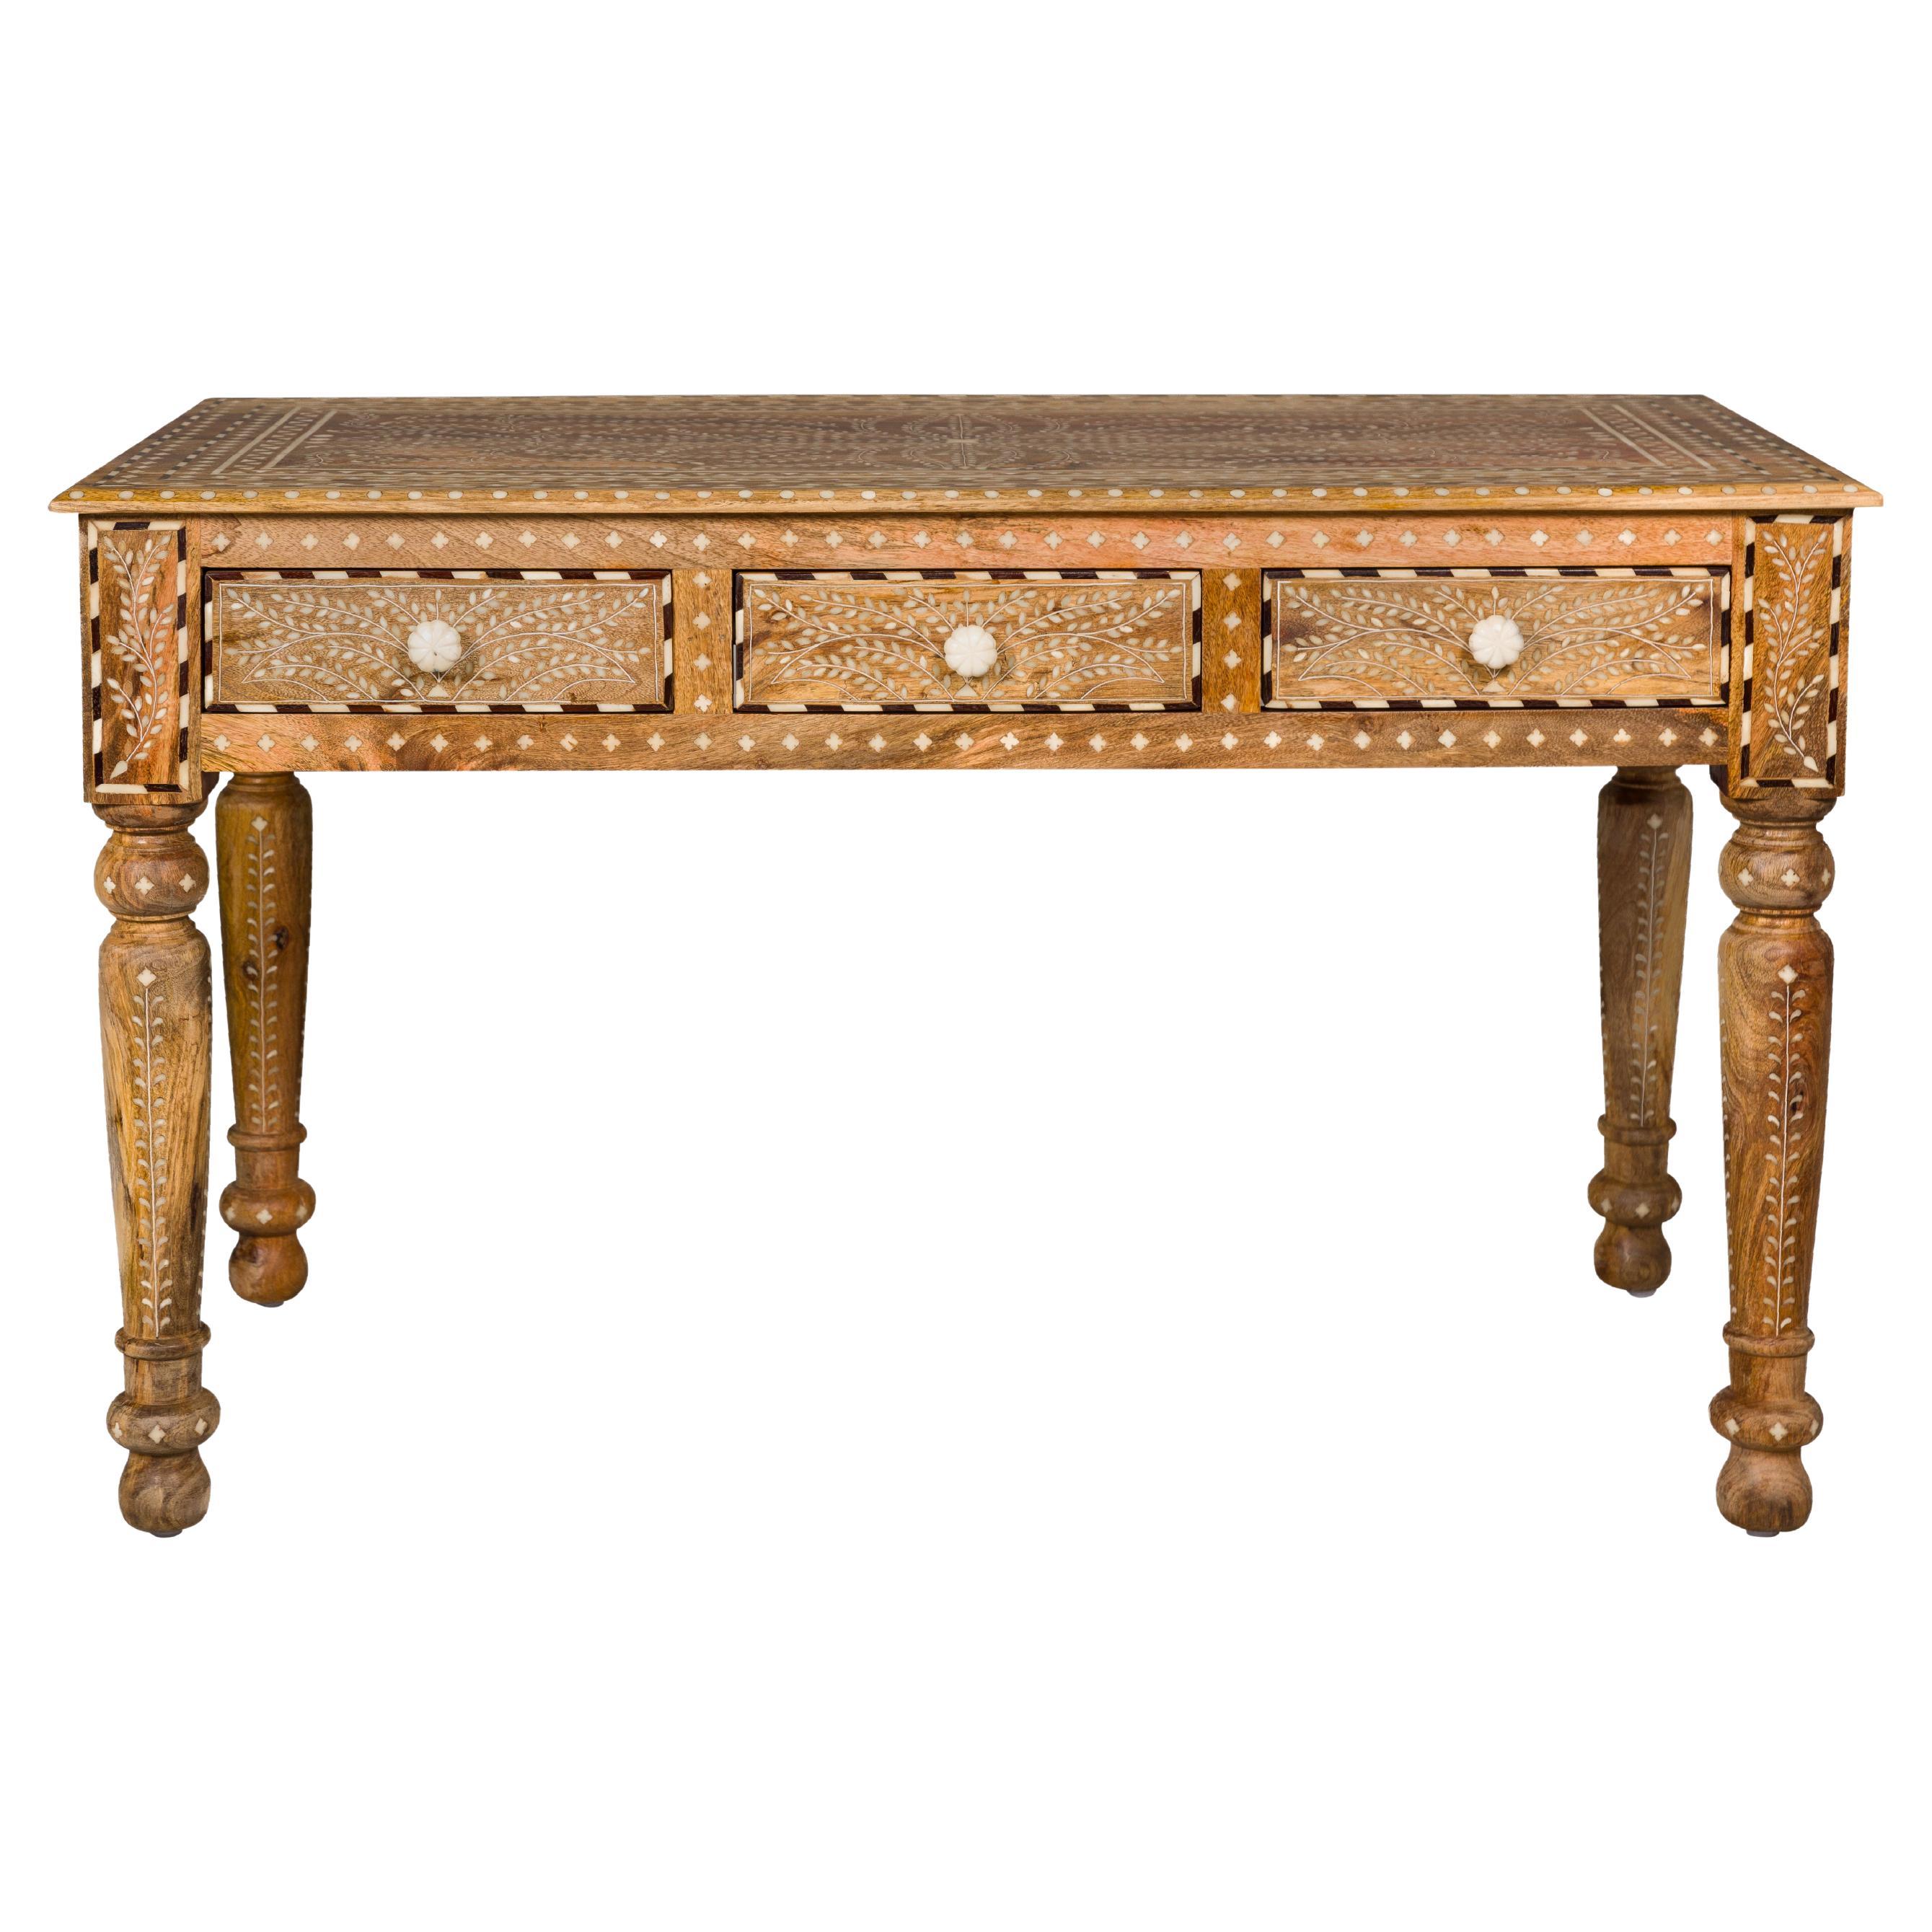 Anglo Indian Style Mango Wood Desk with Drawers, Bone Inlay and Light Patina For Sale